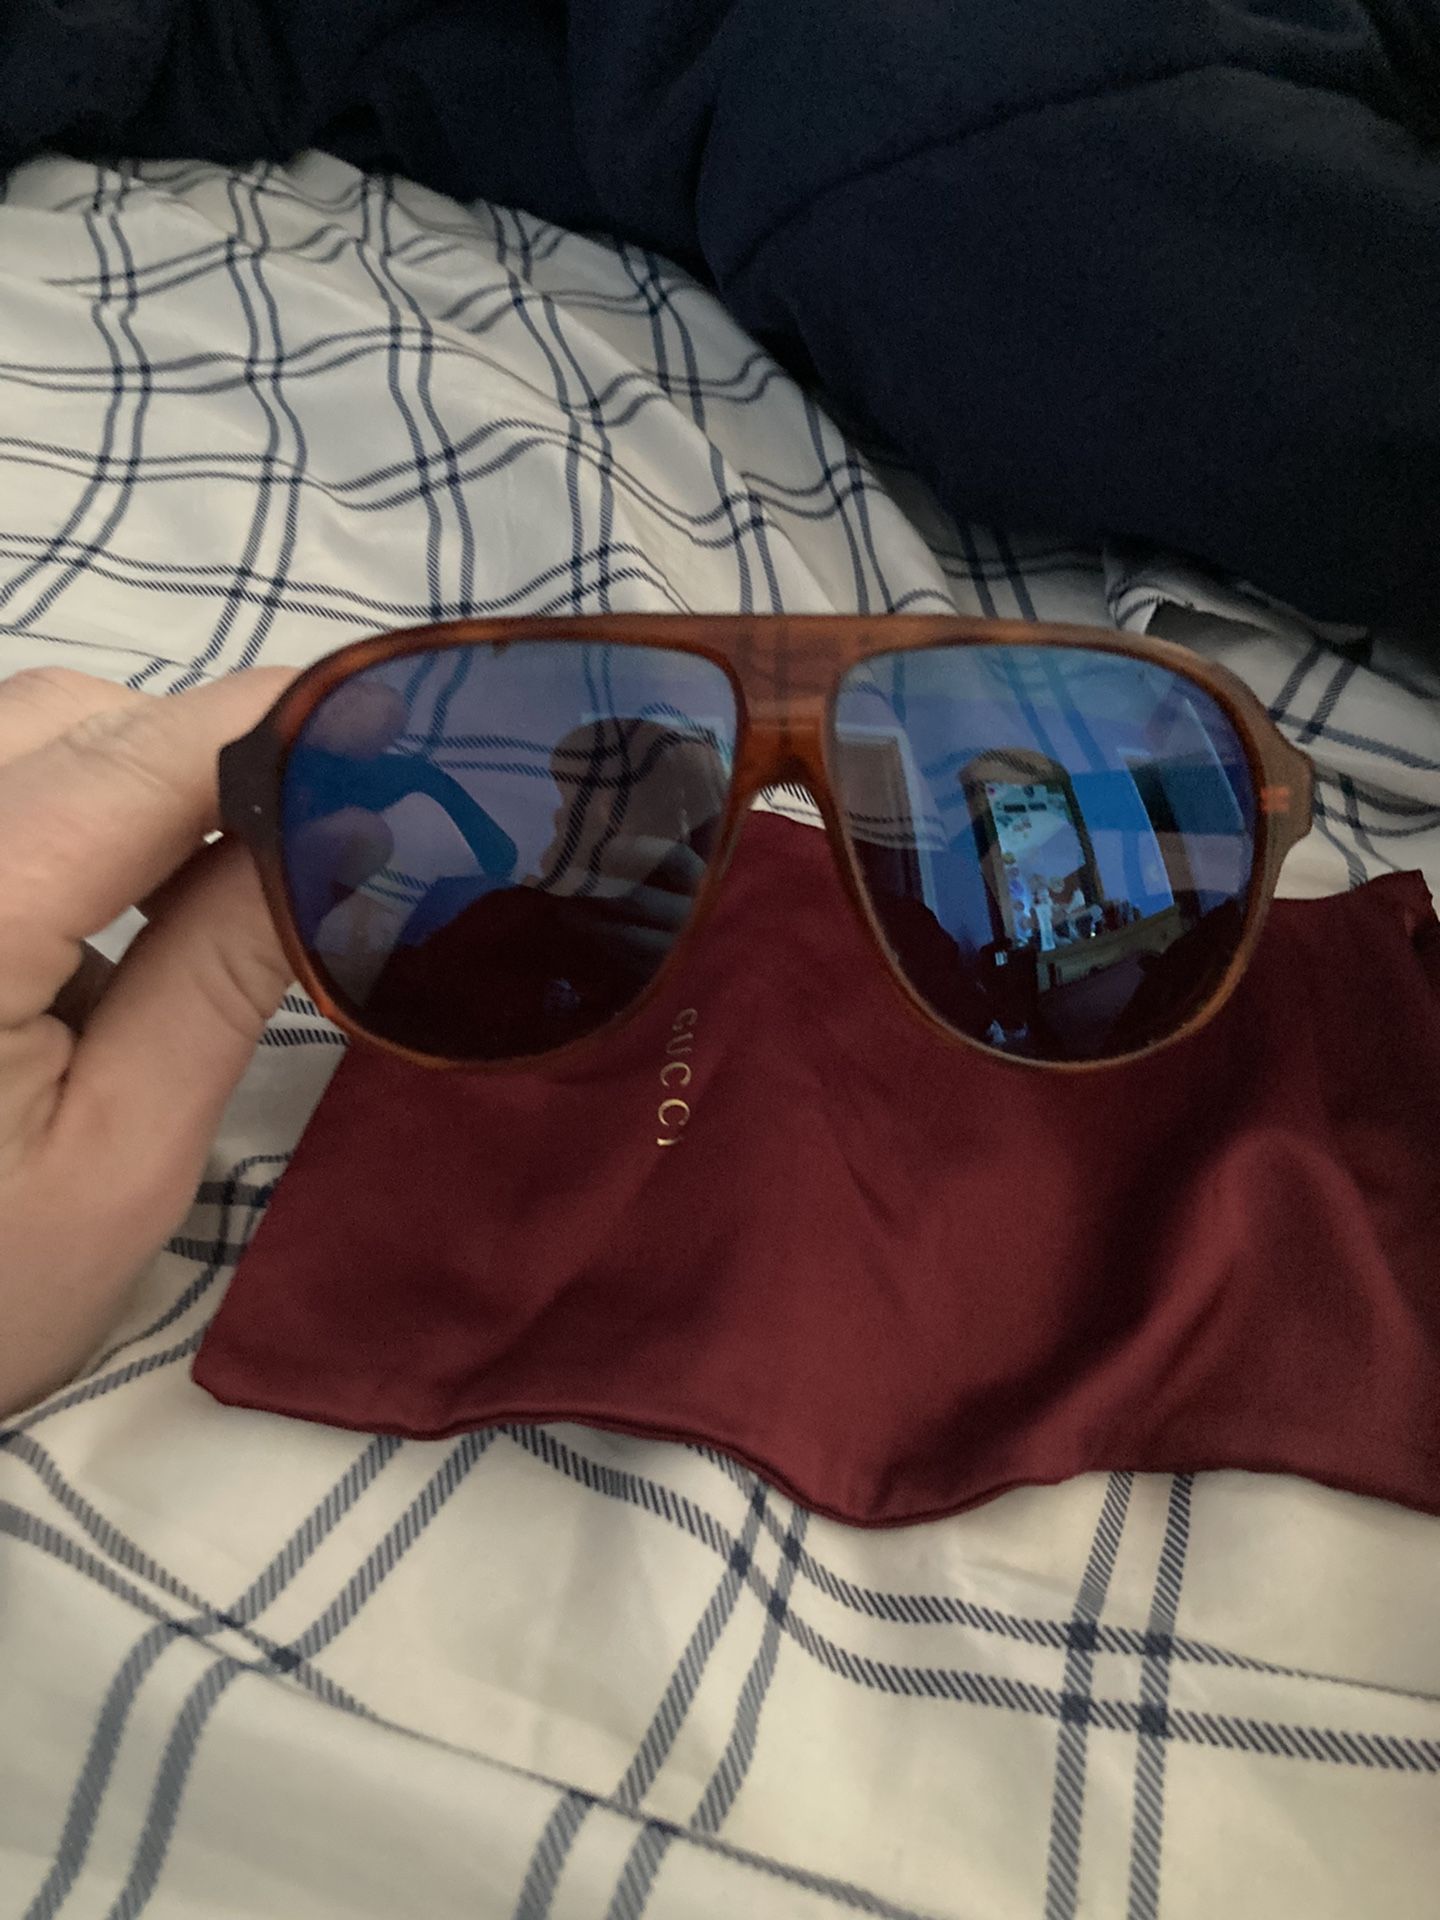 Brand New Gucci Real Sunglasses Paid Over 300$ . Great Glasses!